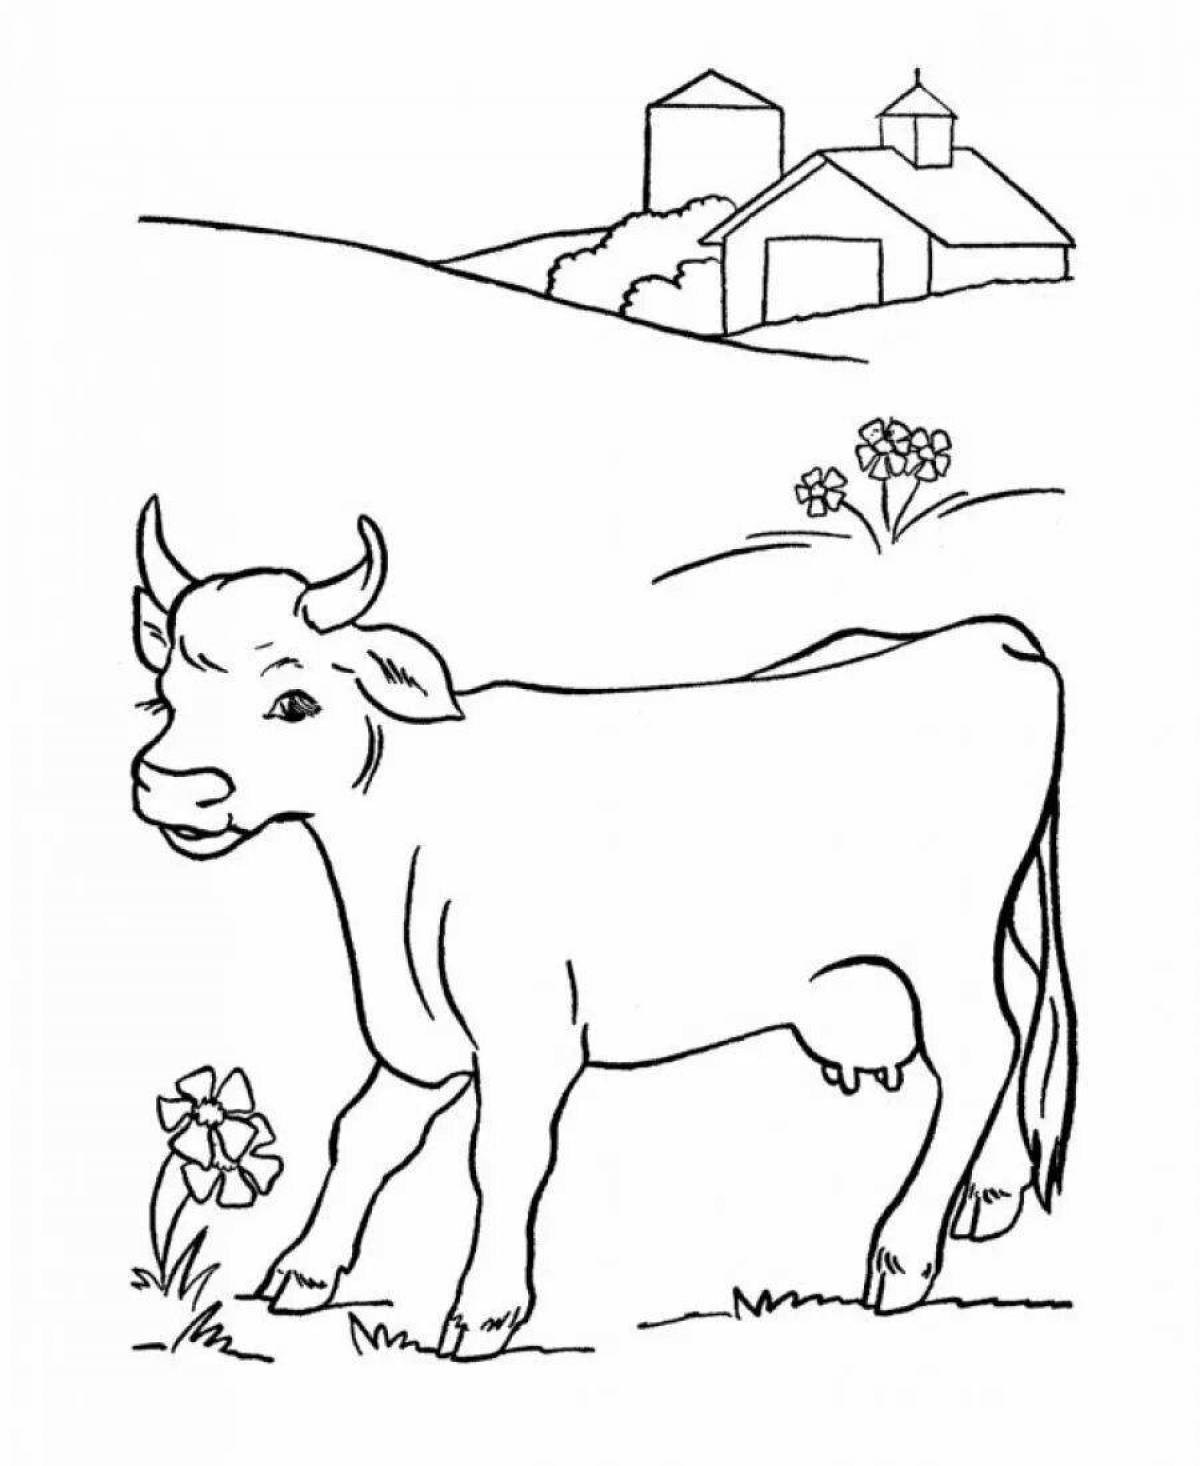 Friendly pet coloring pages for kids